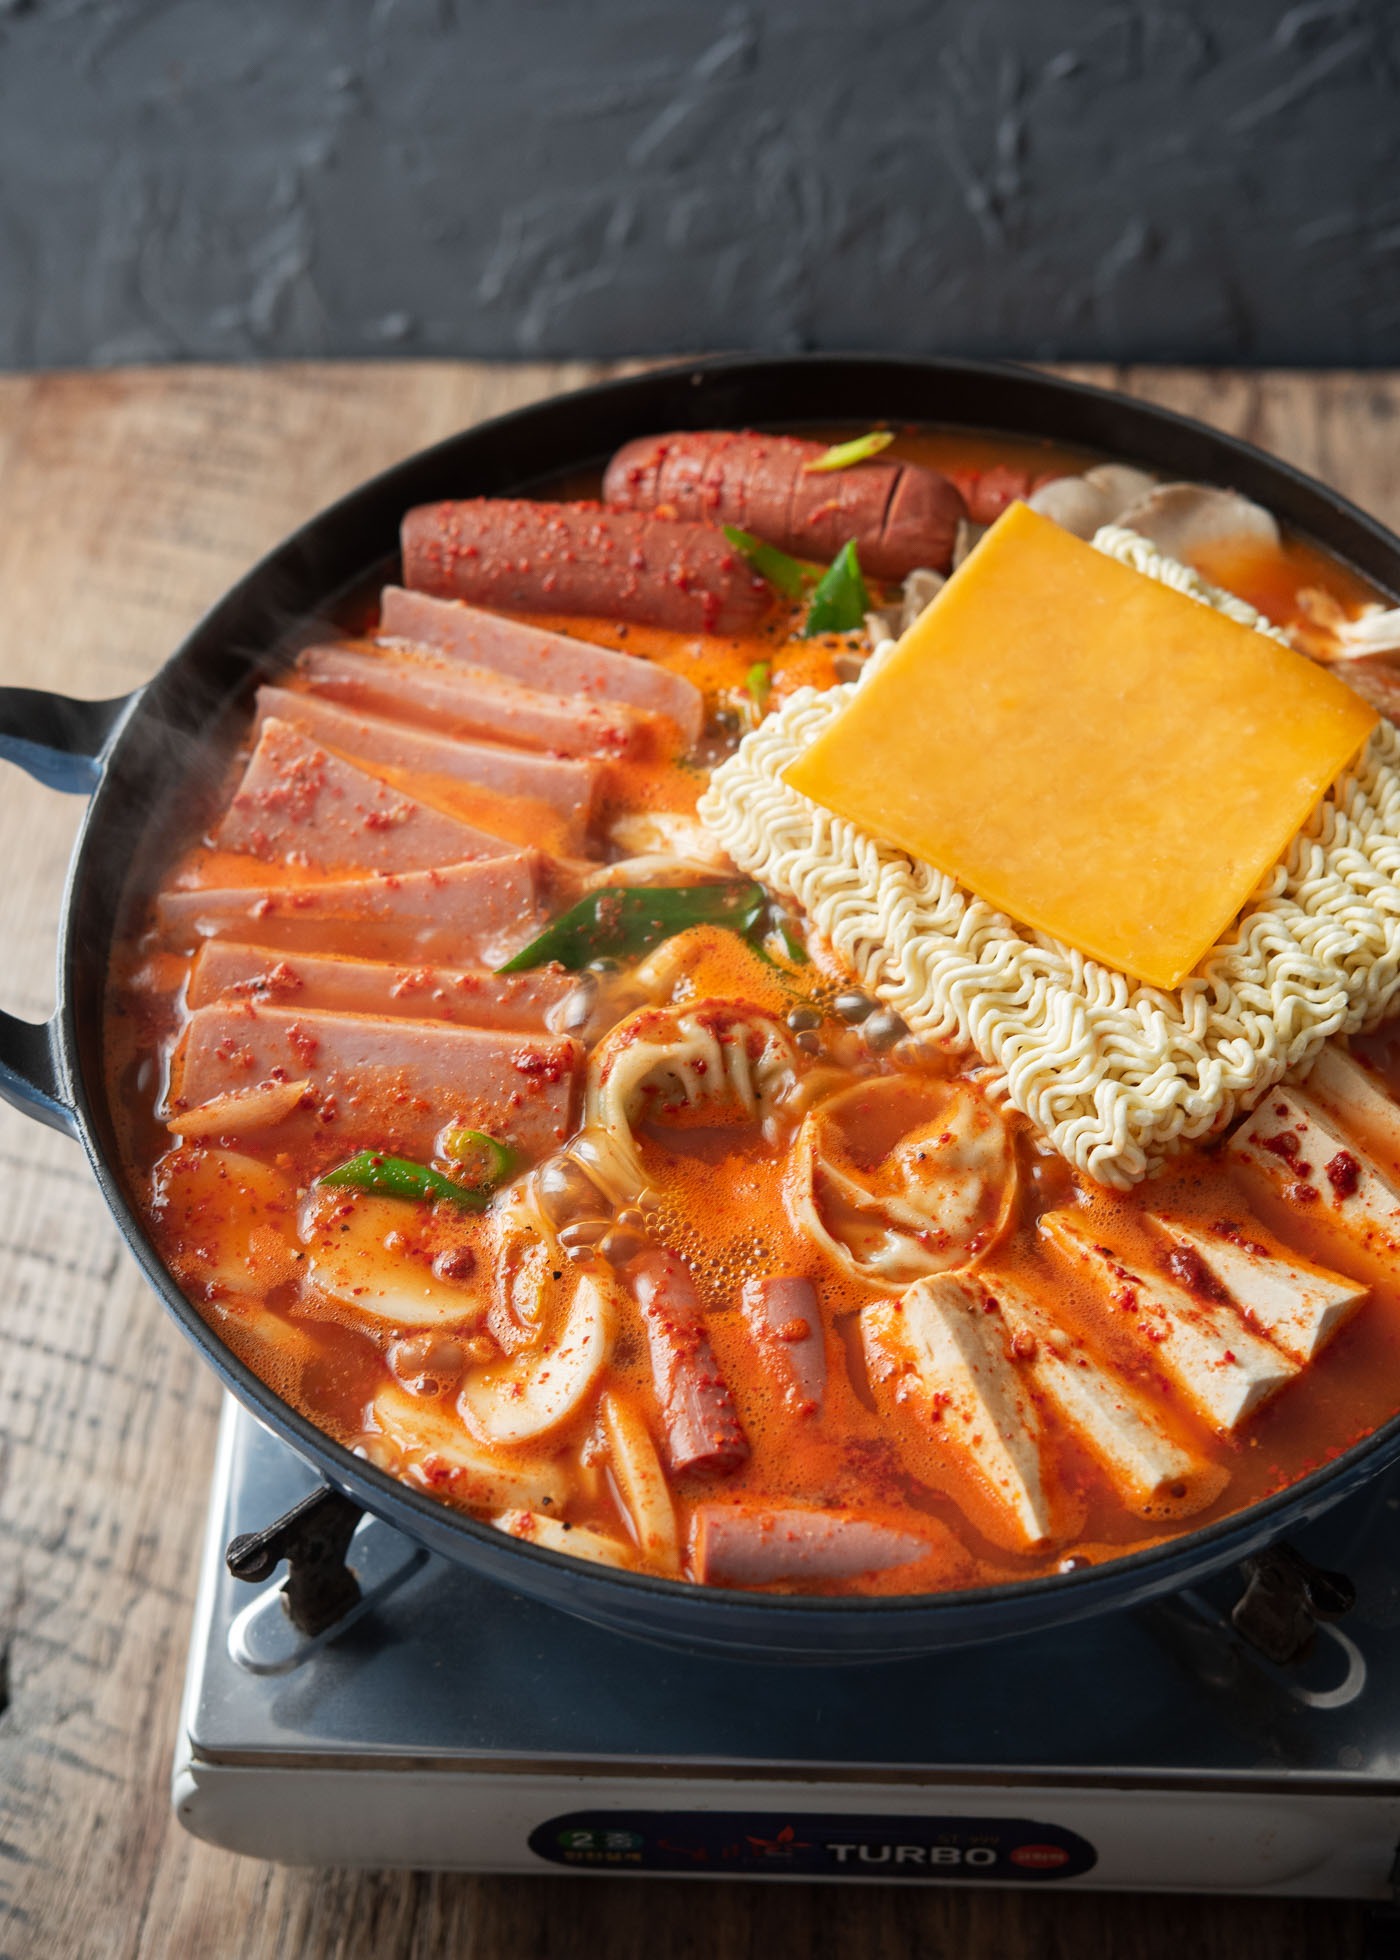 Budae jjigae known as Korean army stew boiling in a pot.